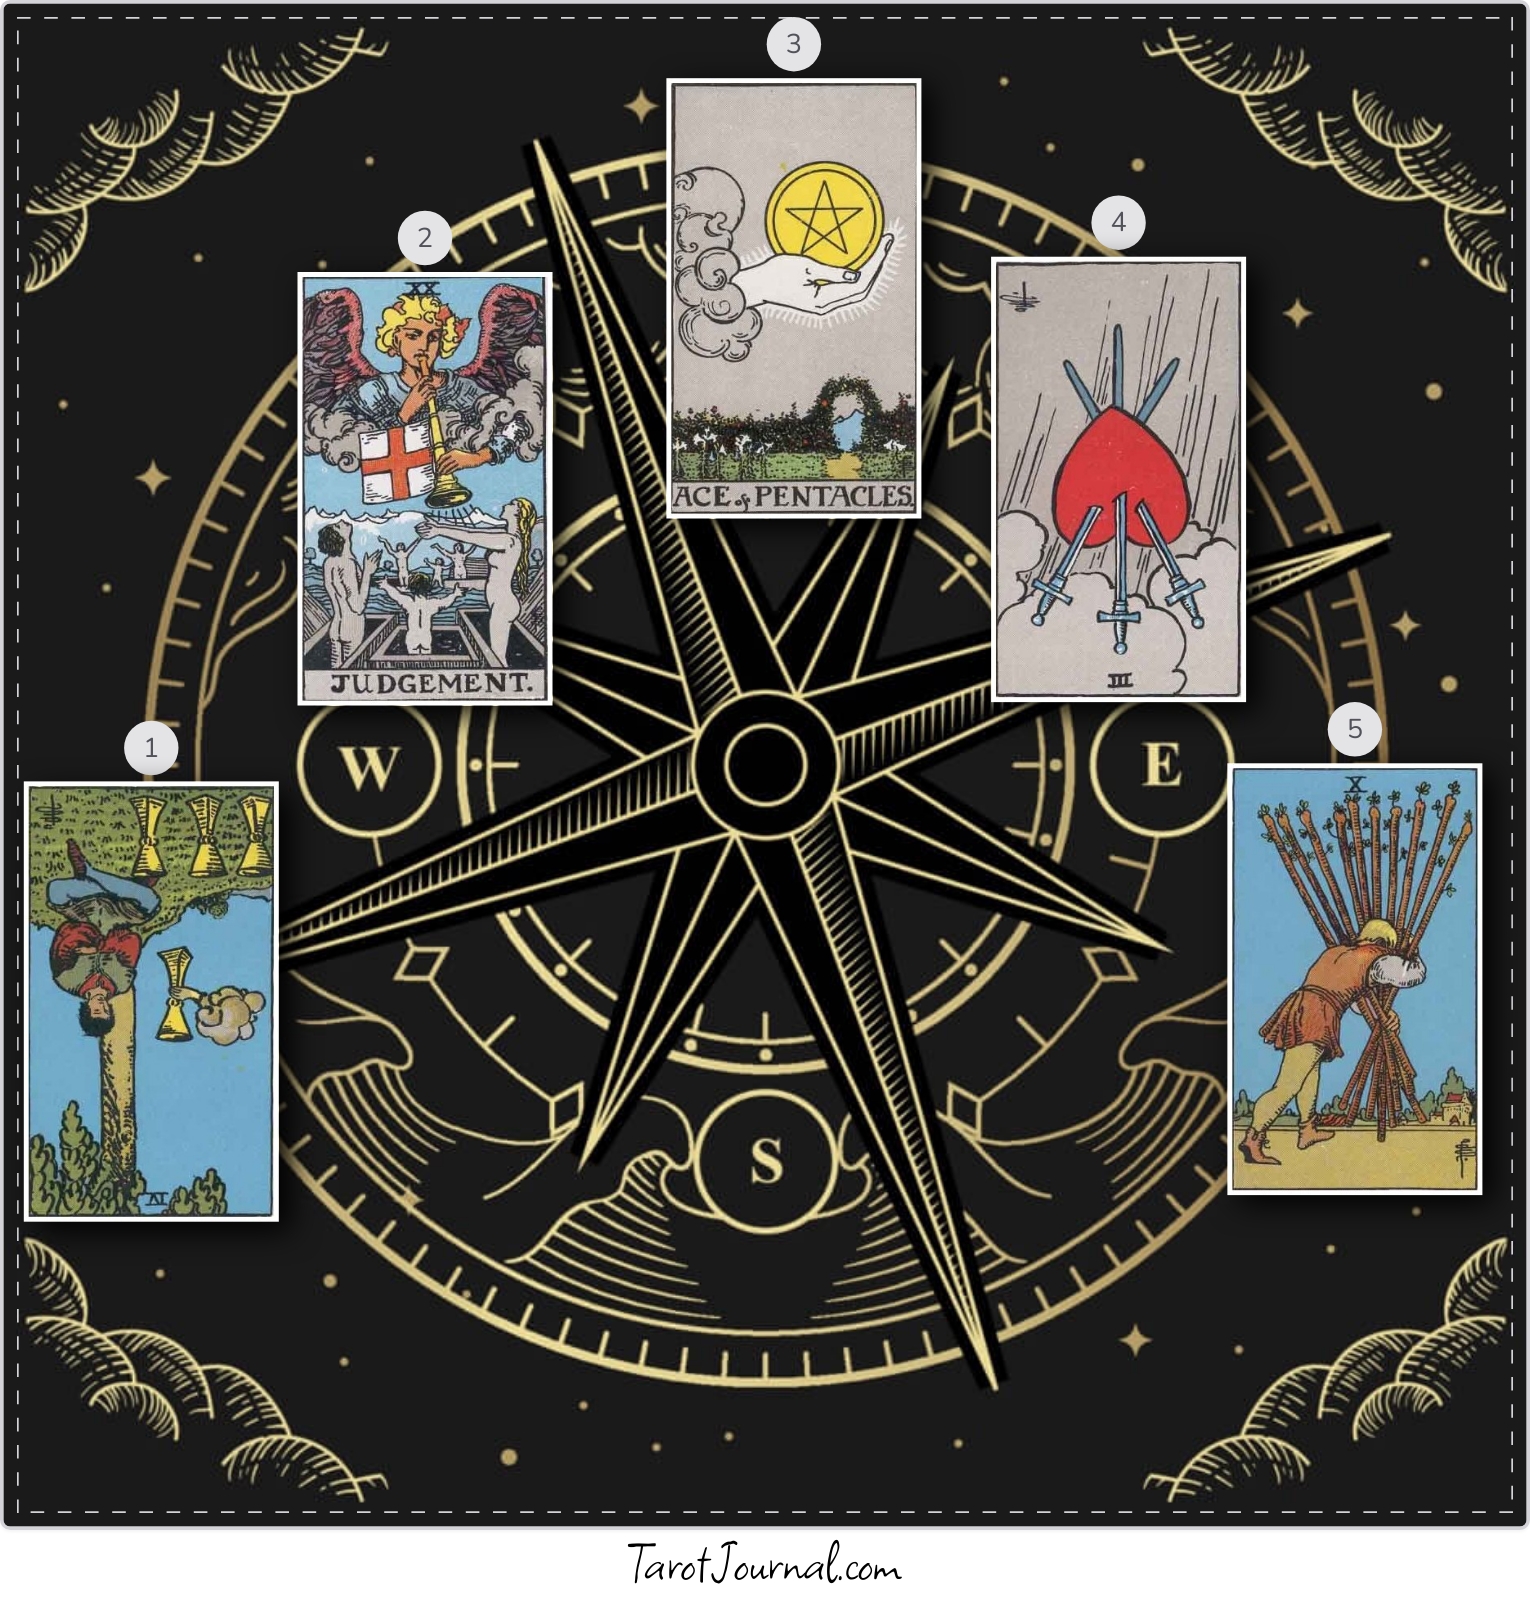 What do i need to know to find clarity ? - tarot reading by jasmine le fleur